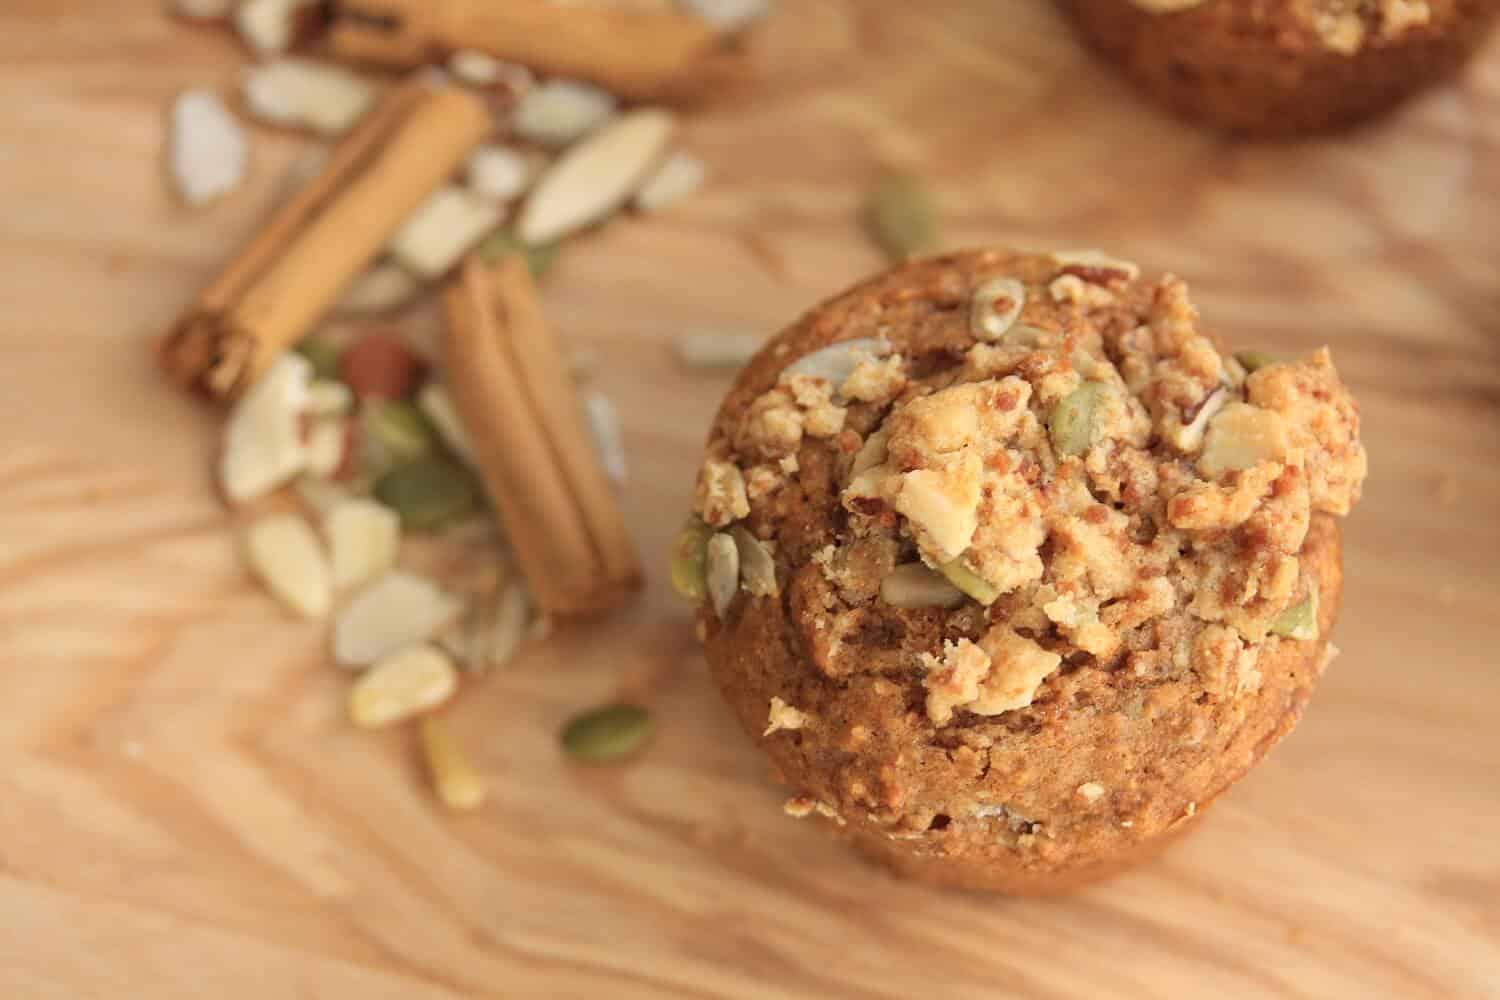 Trail Mix Cinnamon Muffins by Sugar Salt Magic. A healthier version which are tender and moist and all natural